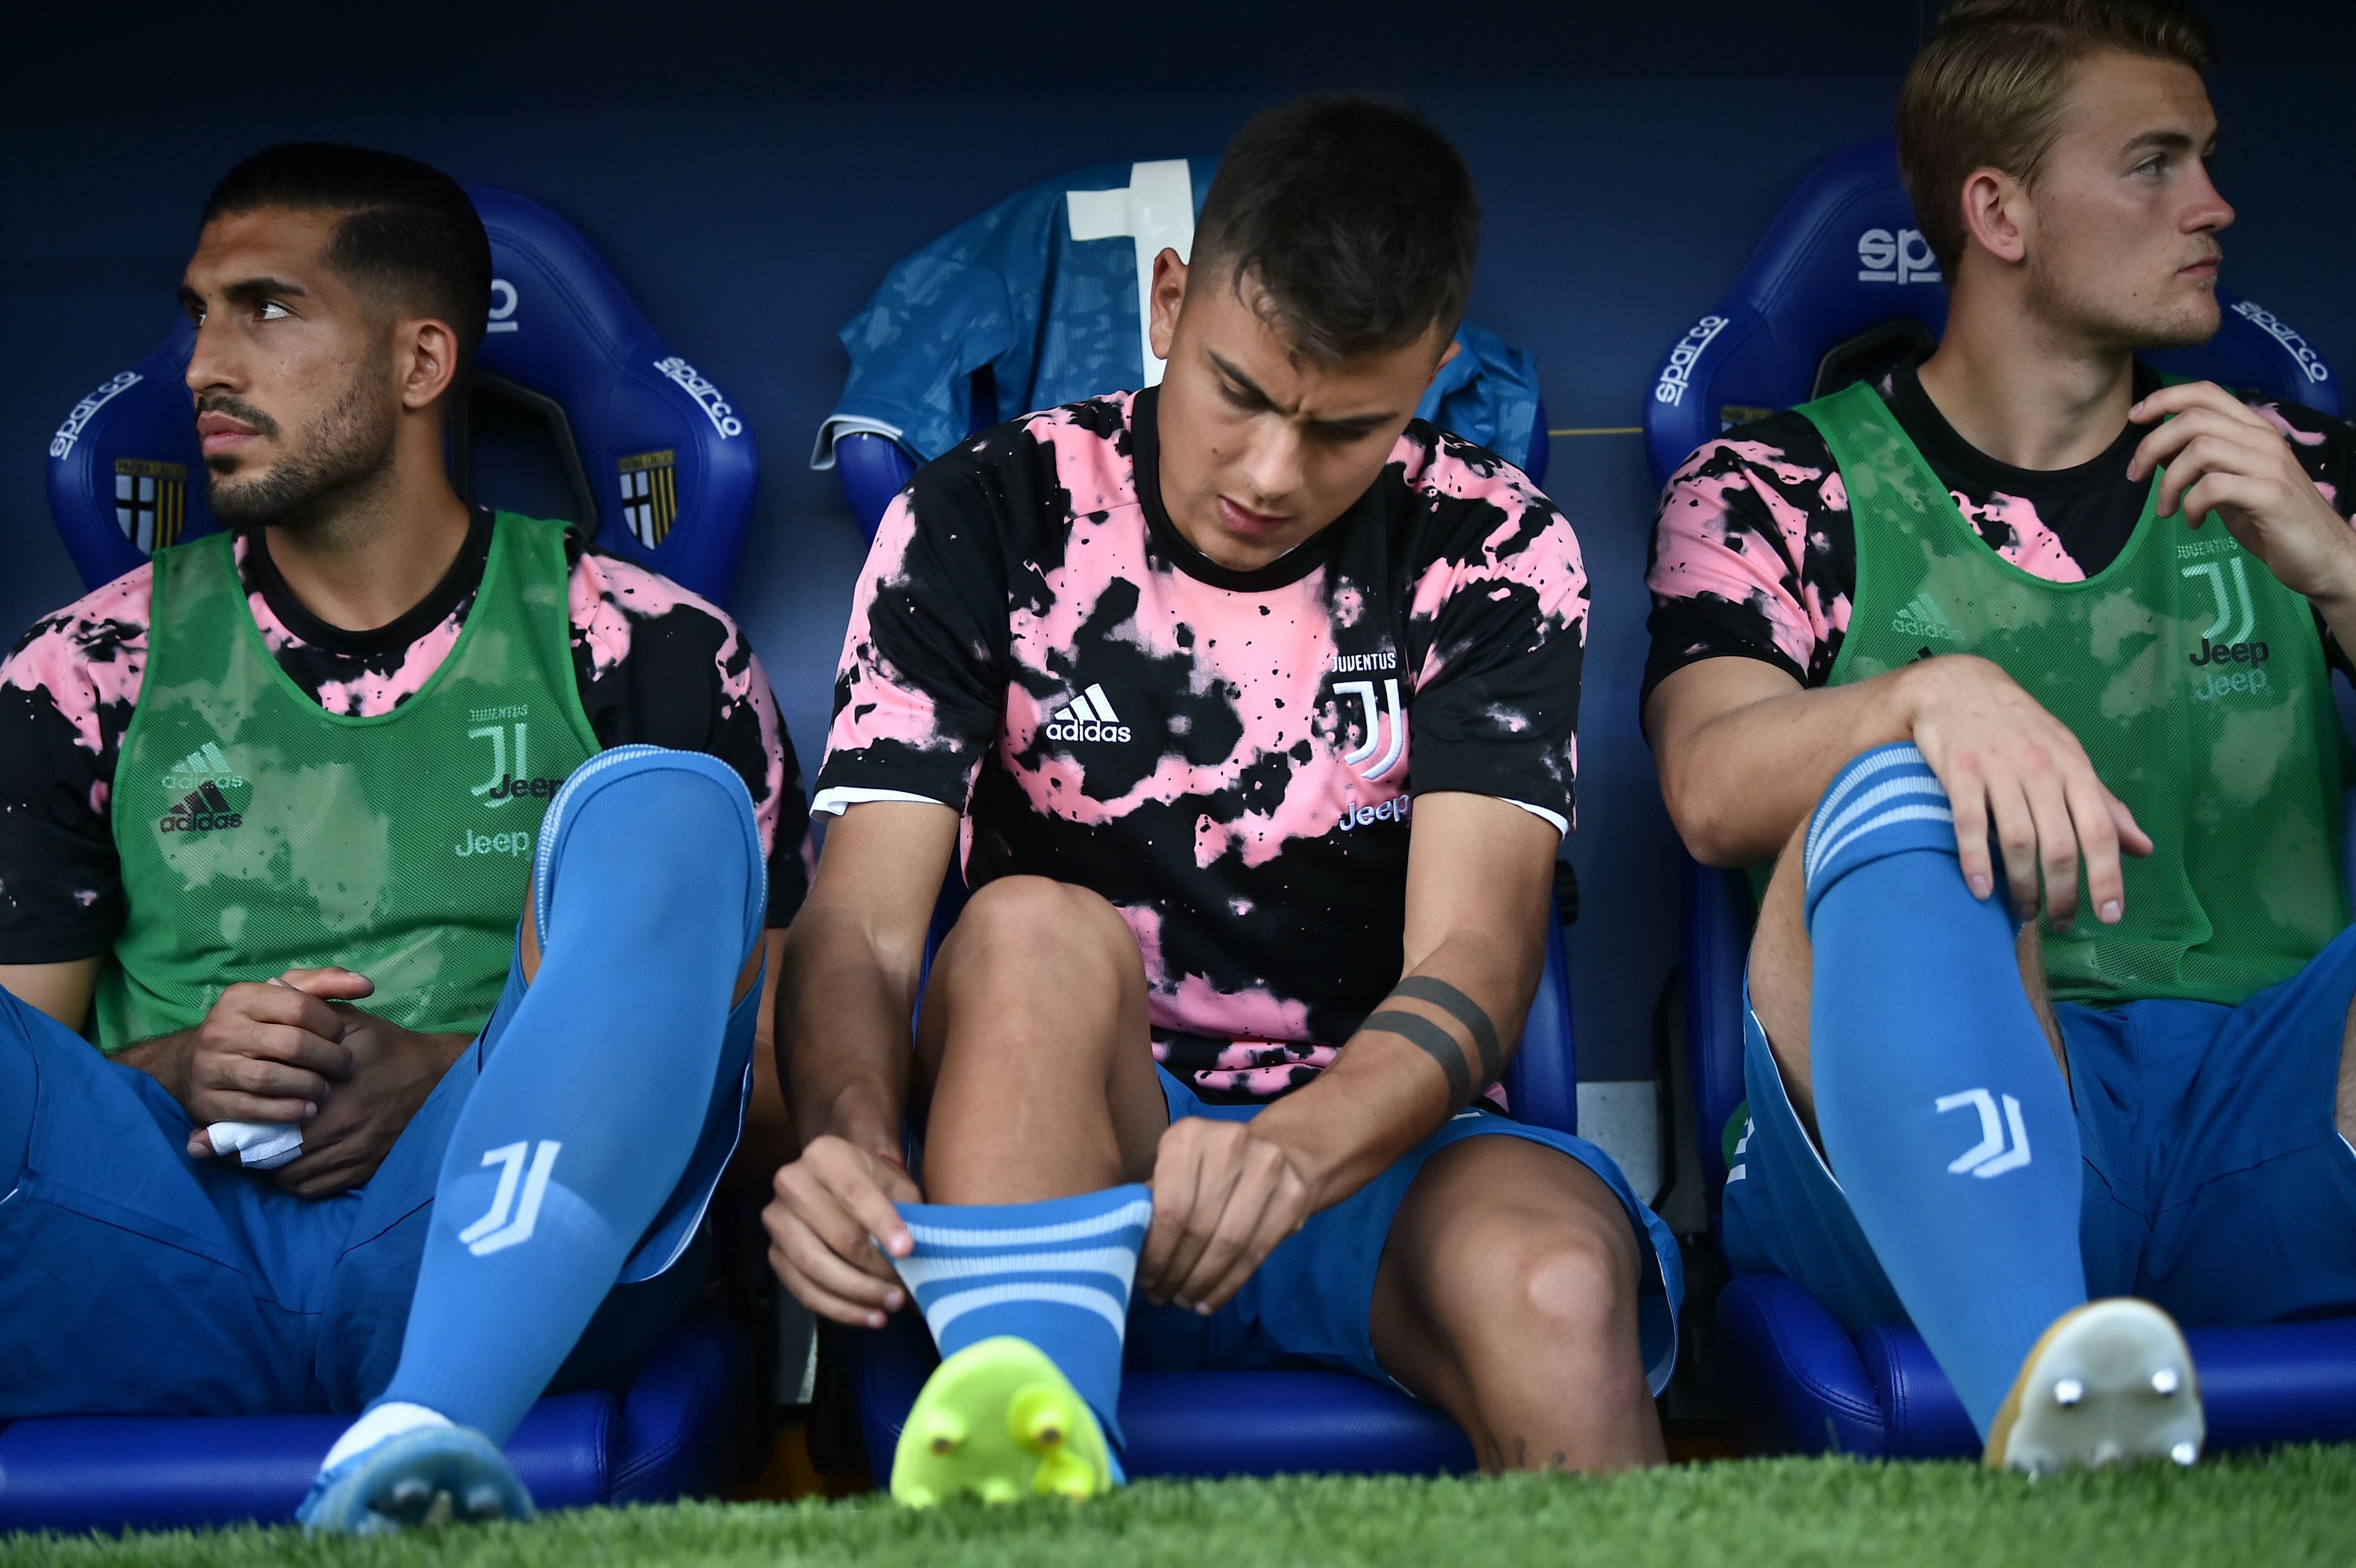 Dybala could be the difference maker on the night. (Photo by Marco Bertorello/AFP/Getty Images)